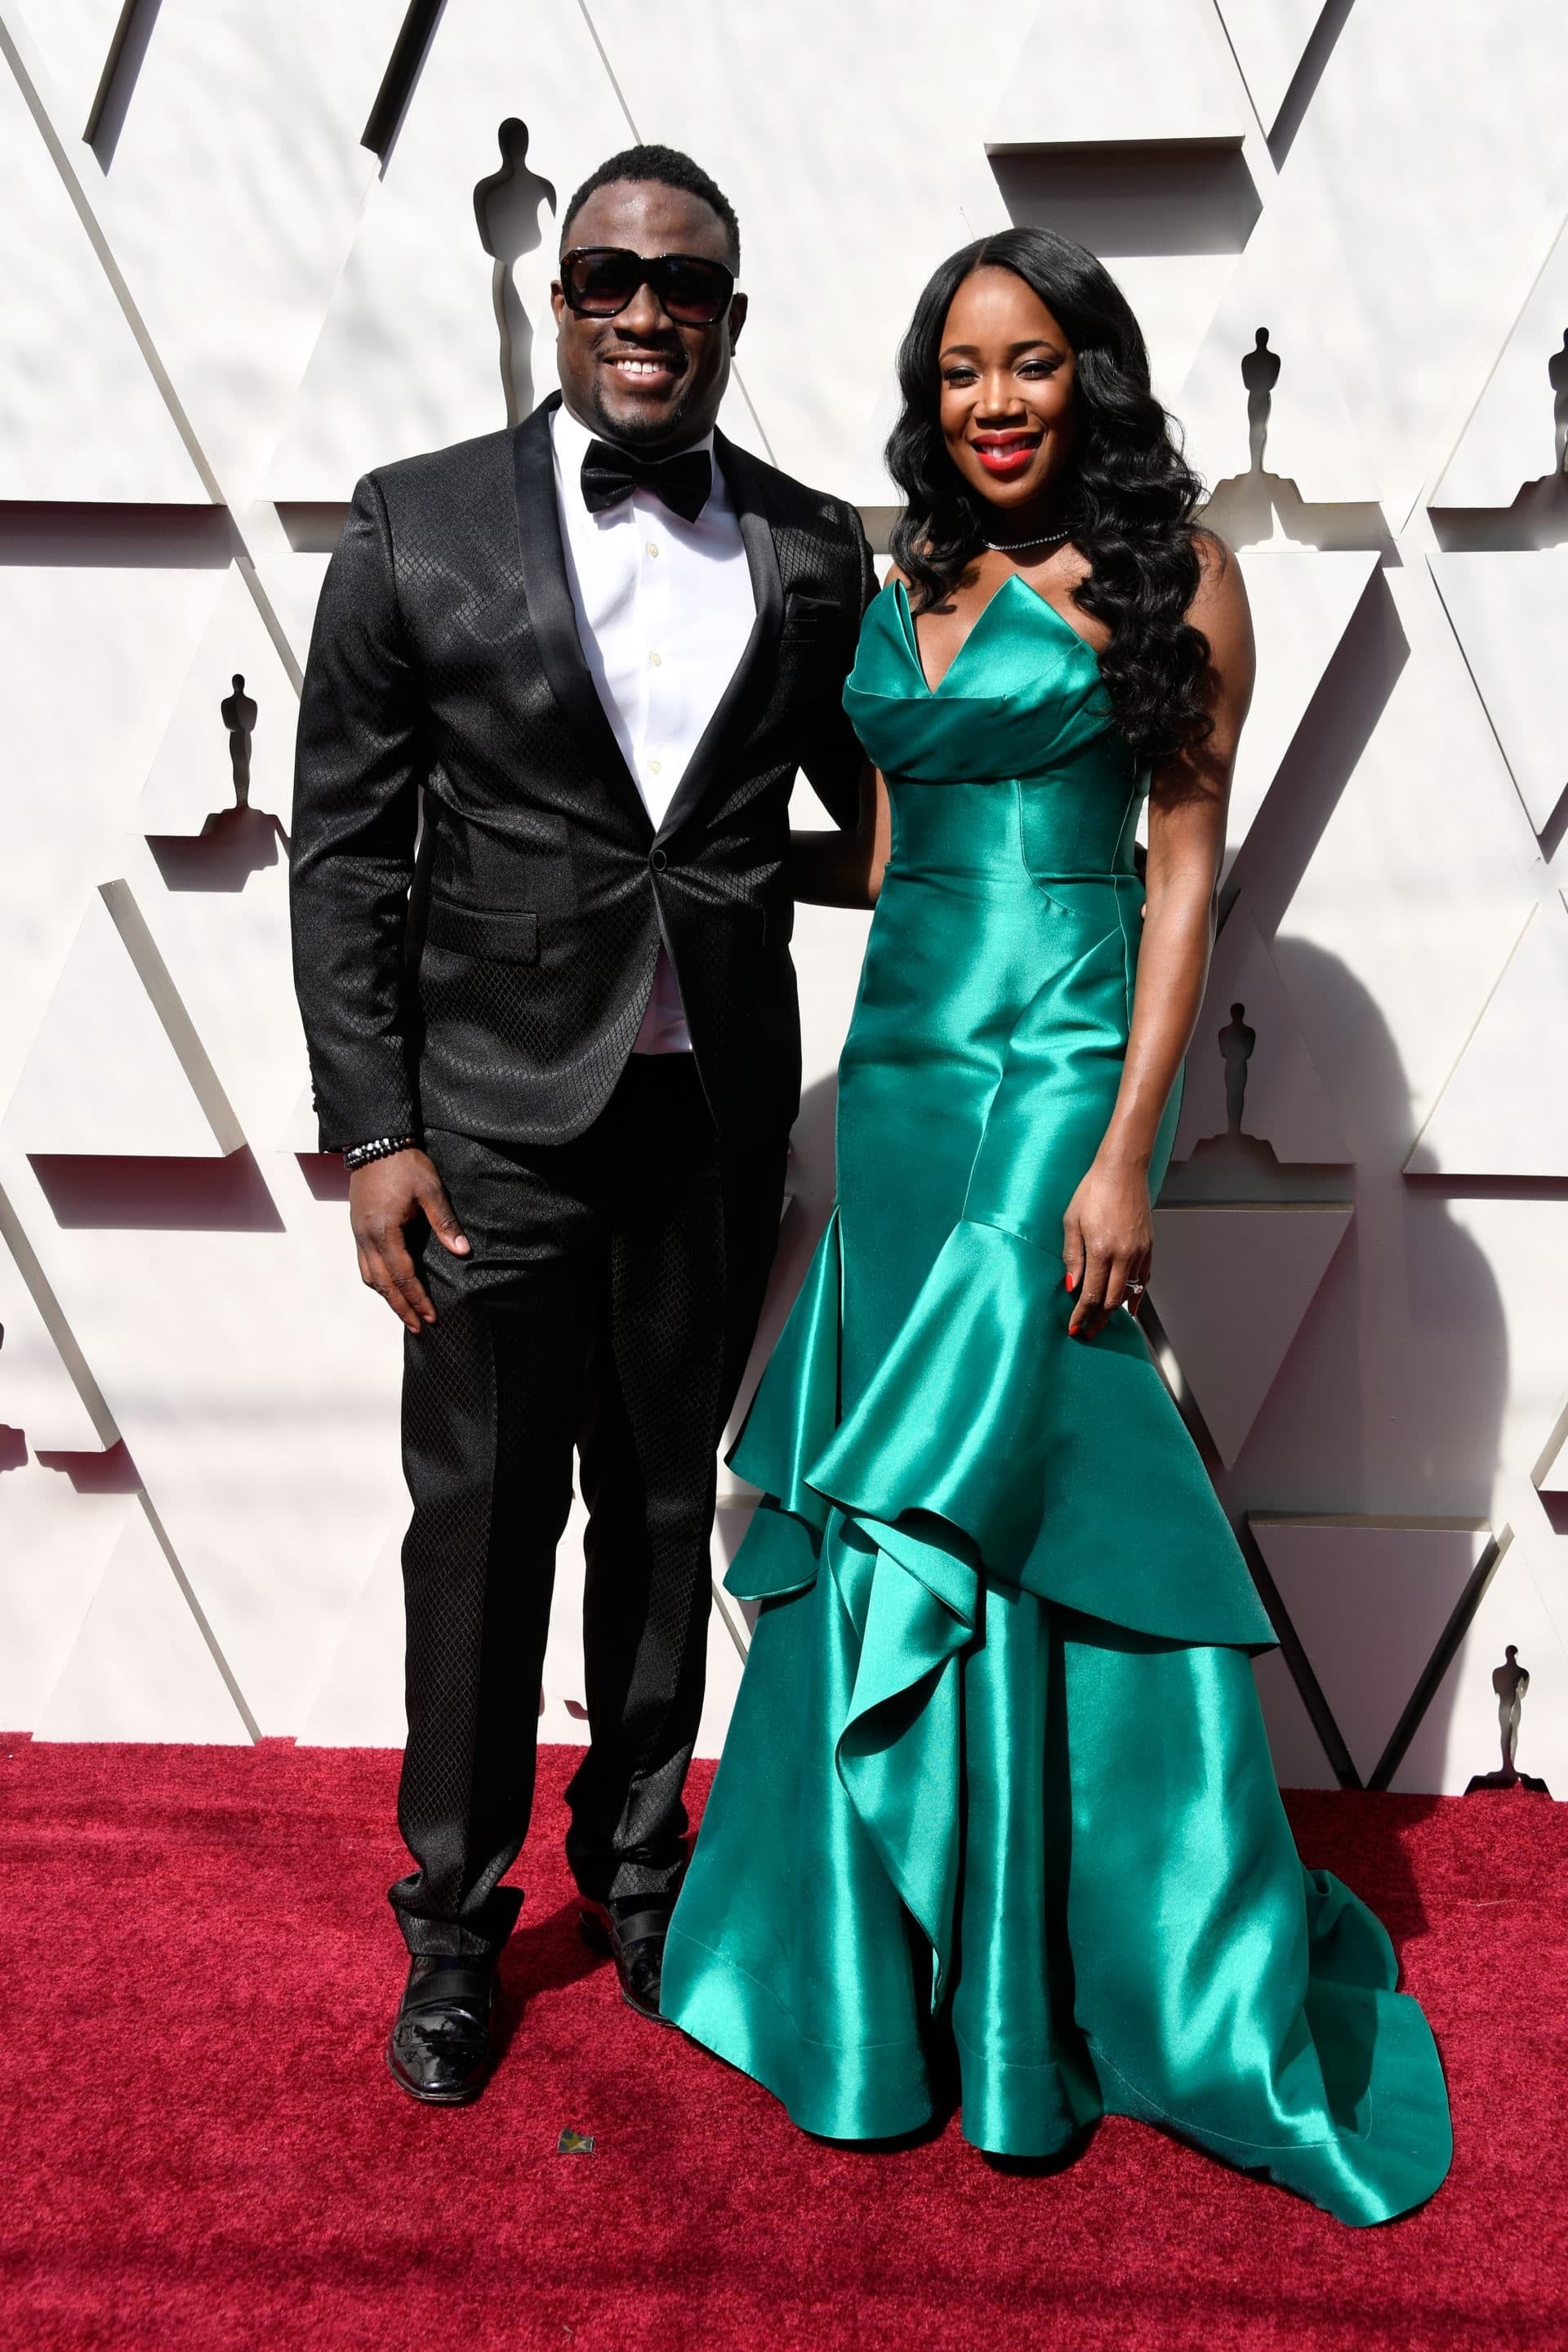 Can You Feel The Love? See Your Favorite Couples Shining On The Oscars Red Carpet